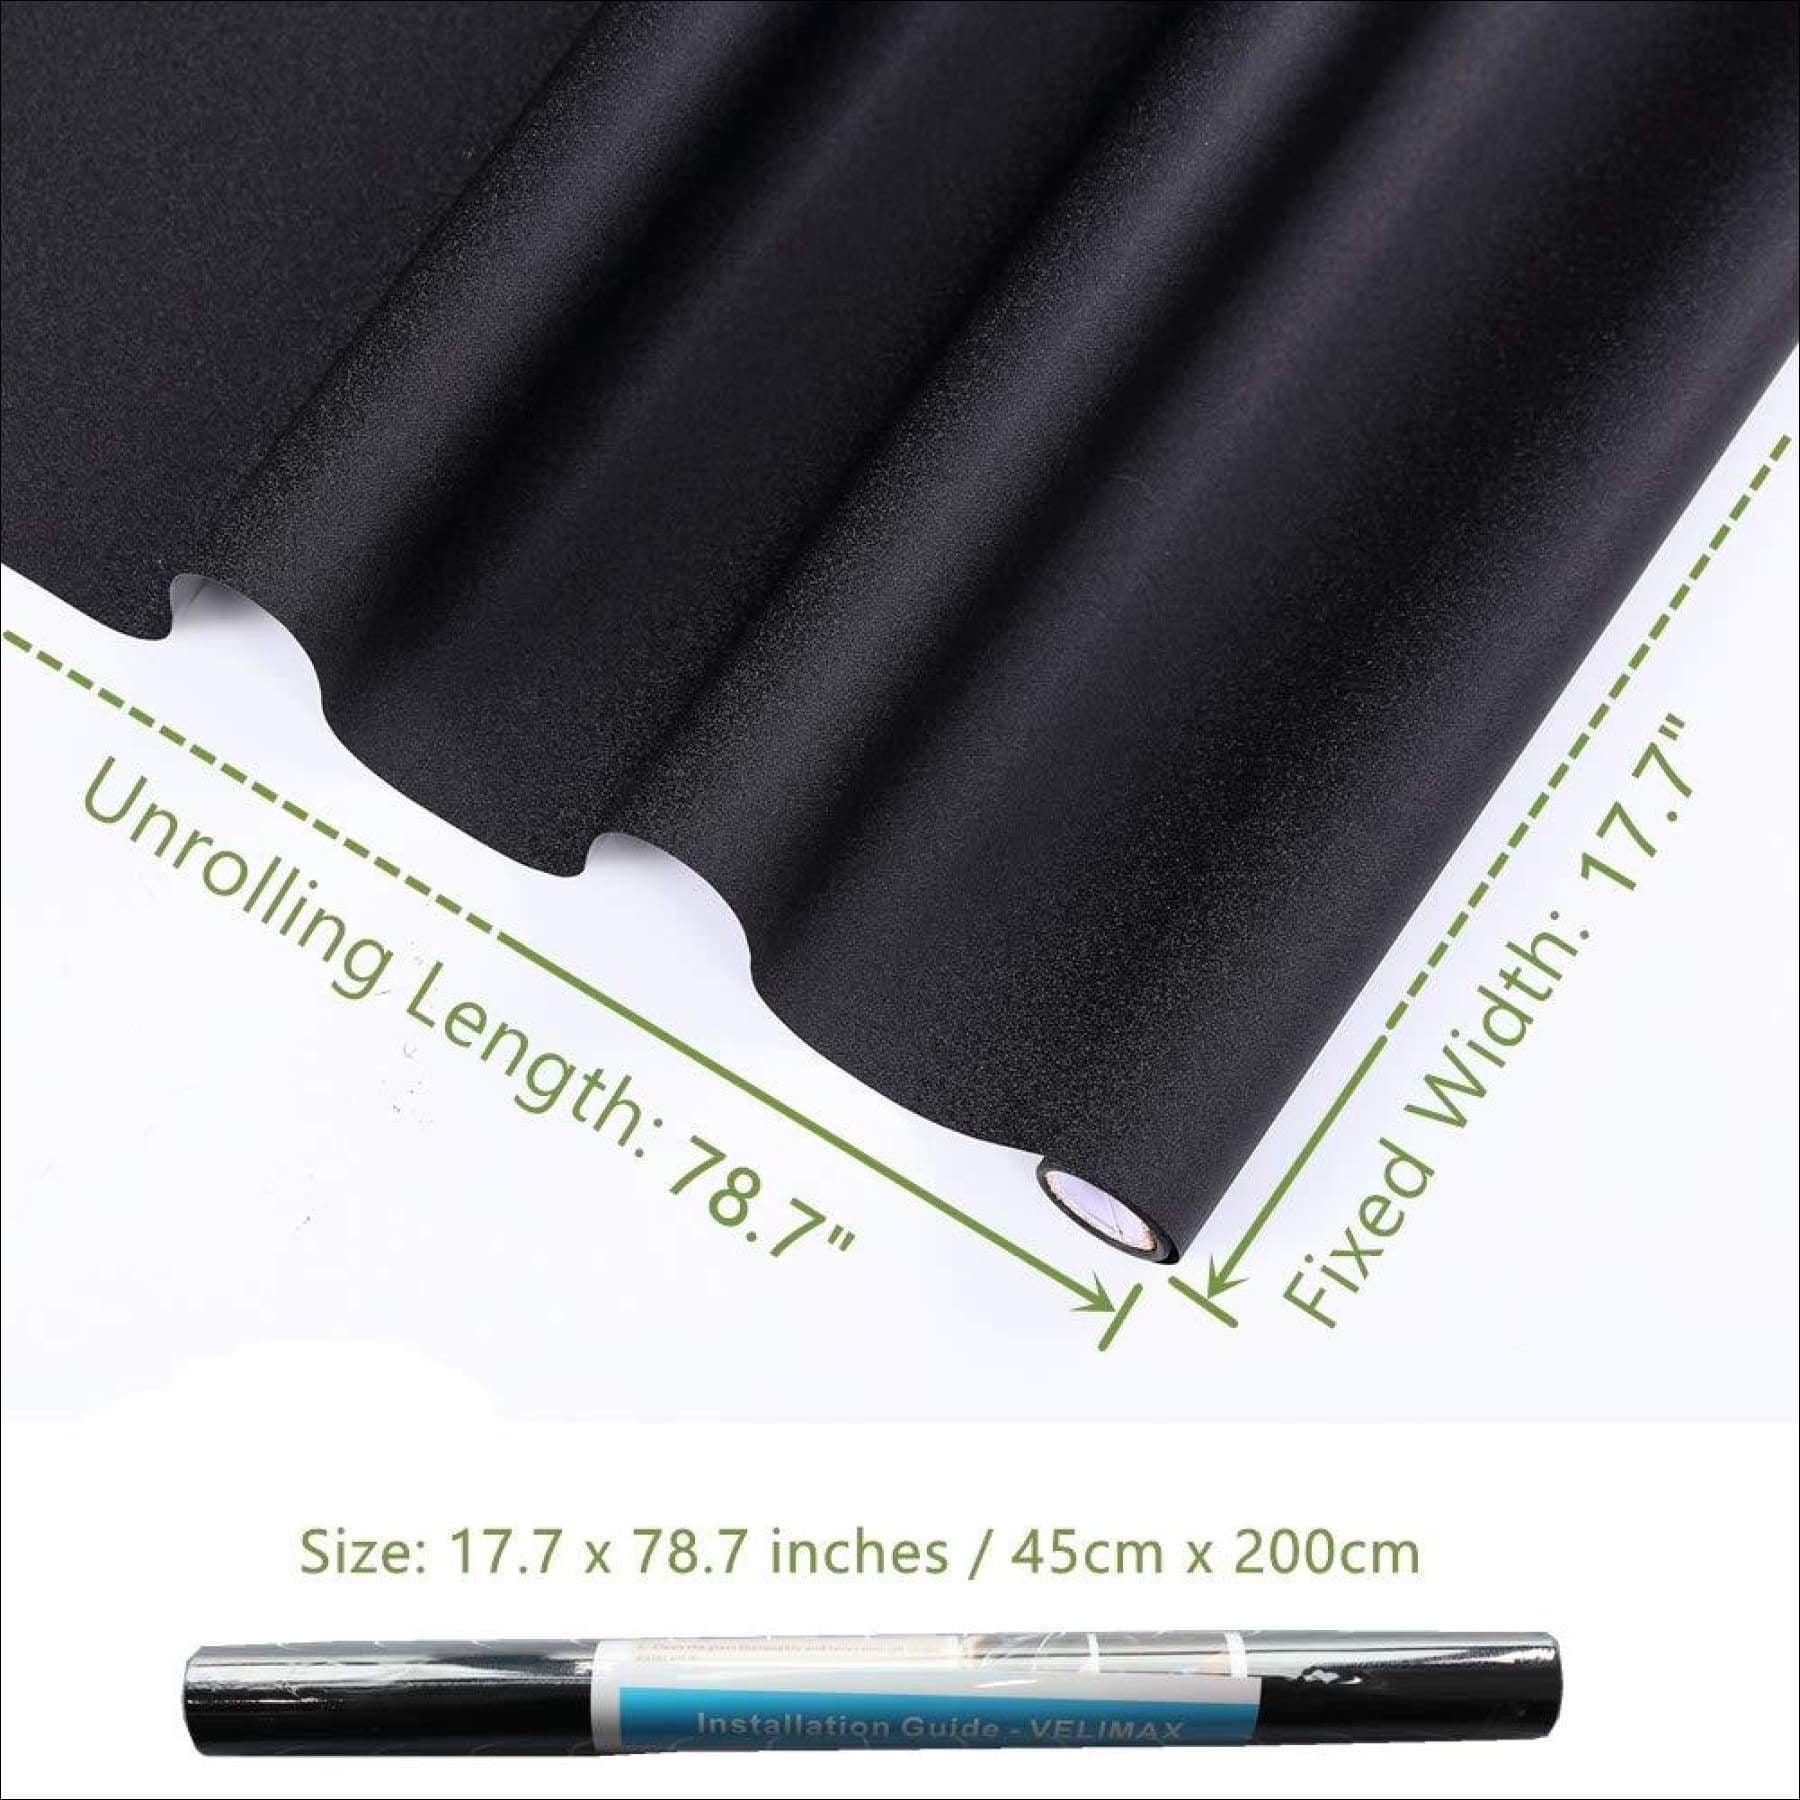 17.7 x 78.7 inches VELIMAX Static Cling Total Blackout Window Film Privacy Room Darkening Window Tint Black Window Cover 100% Light Blocking No Glue